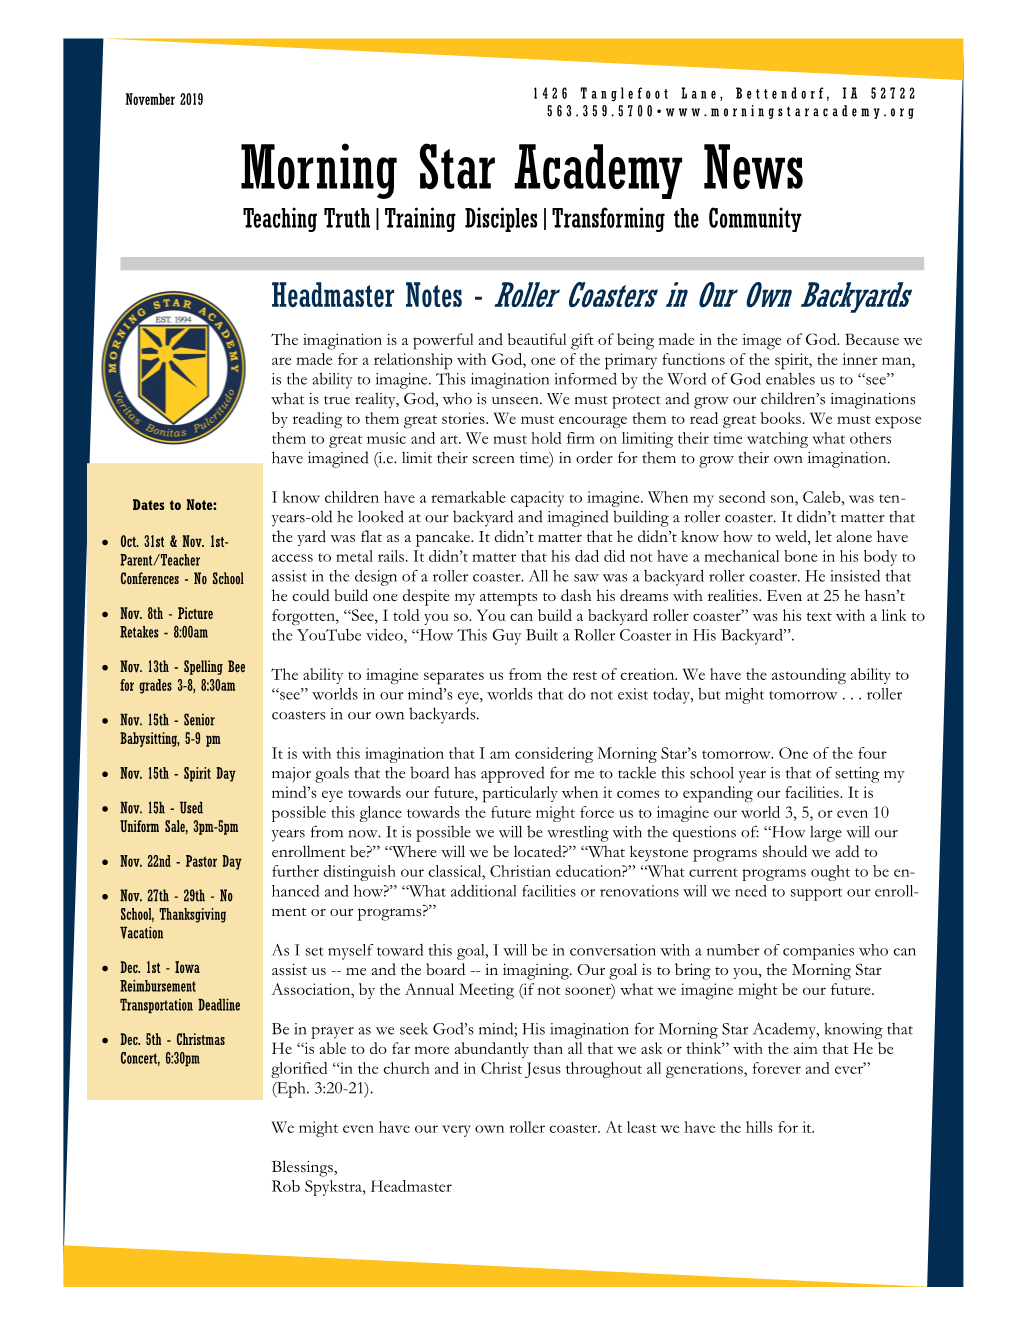 Morning Star Academy News Teaching Truth|Training Disciples|Transforming the Community